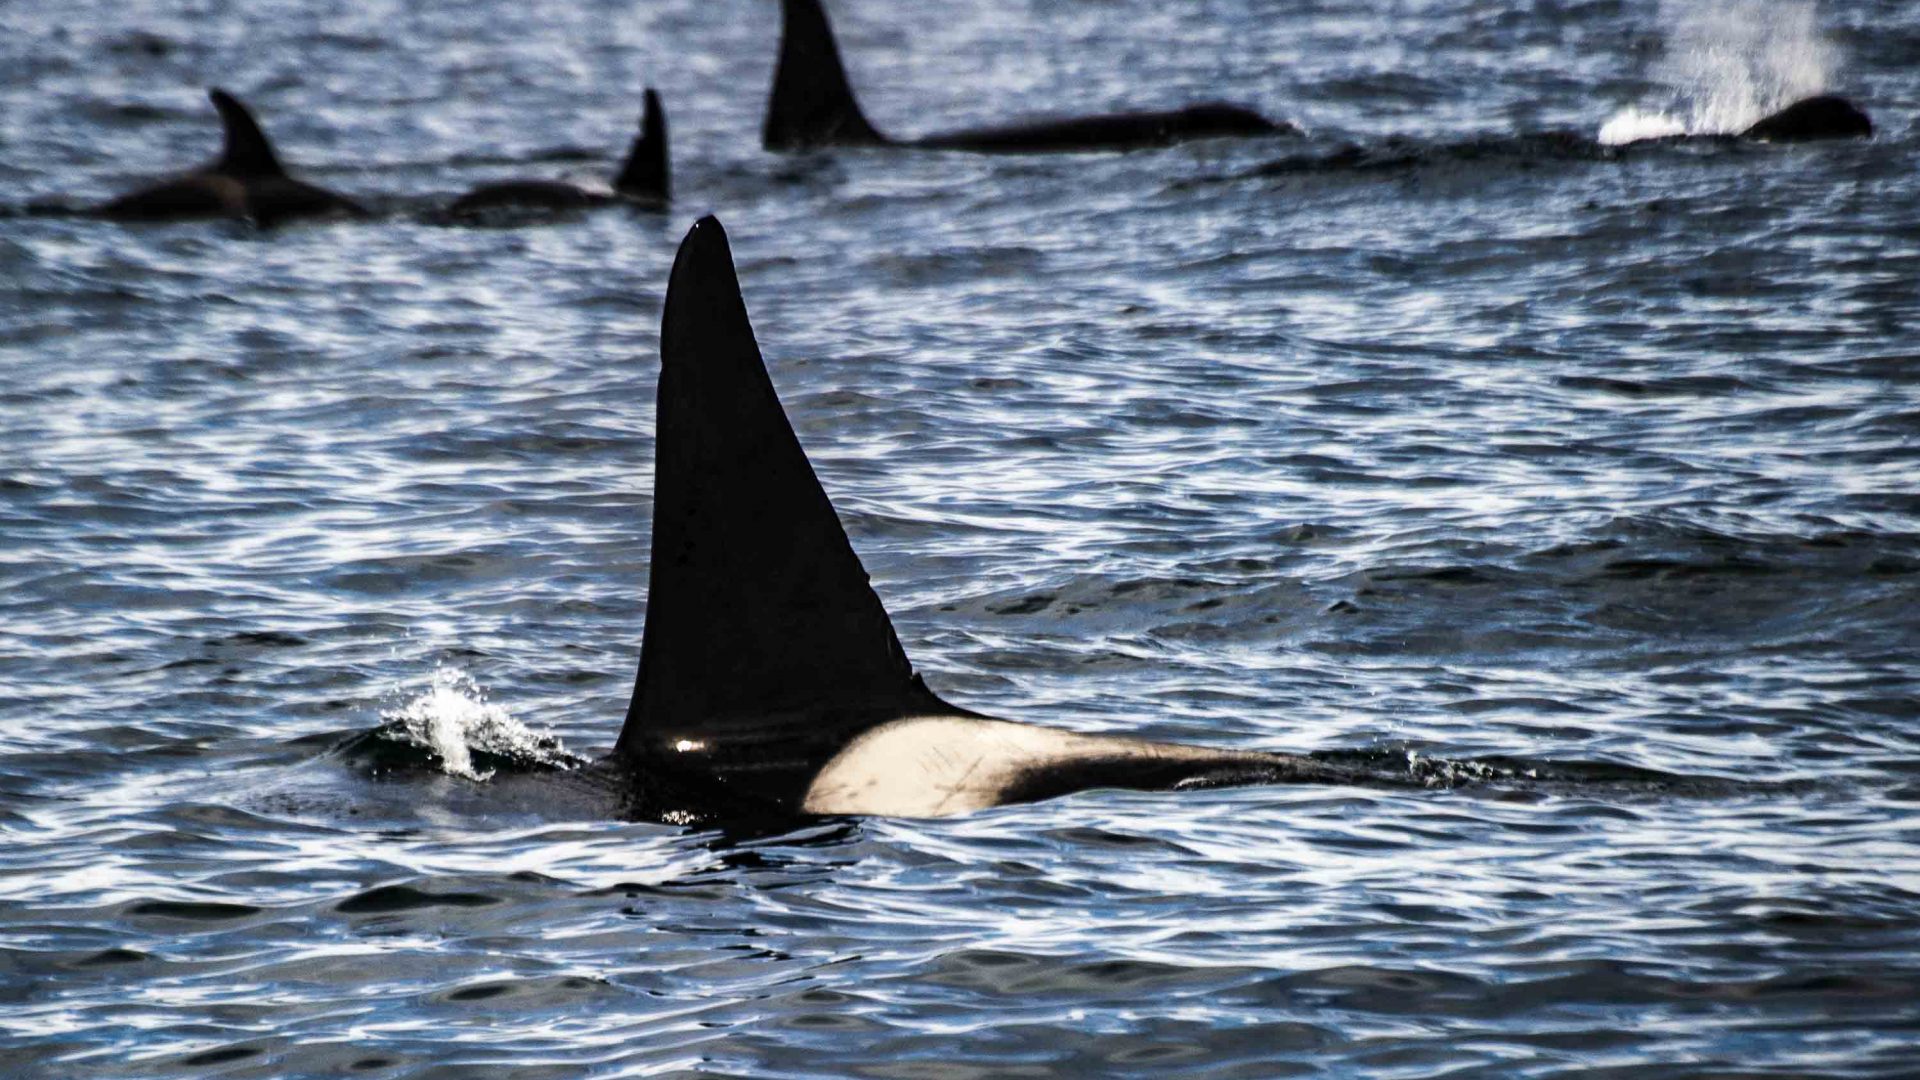 A family or orcas swims by.